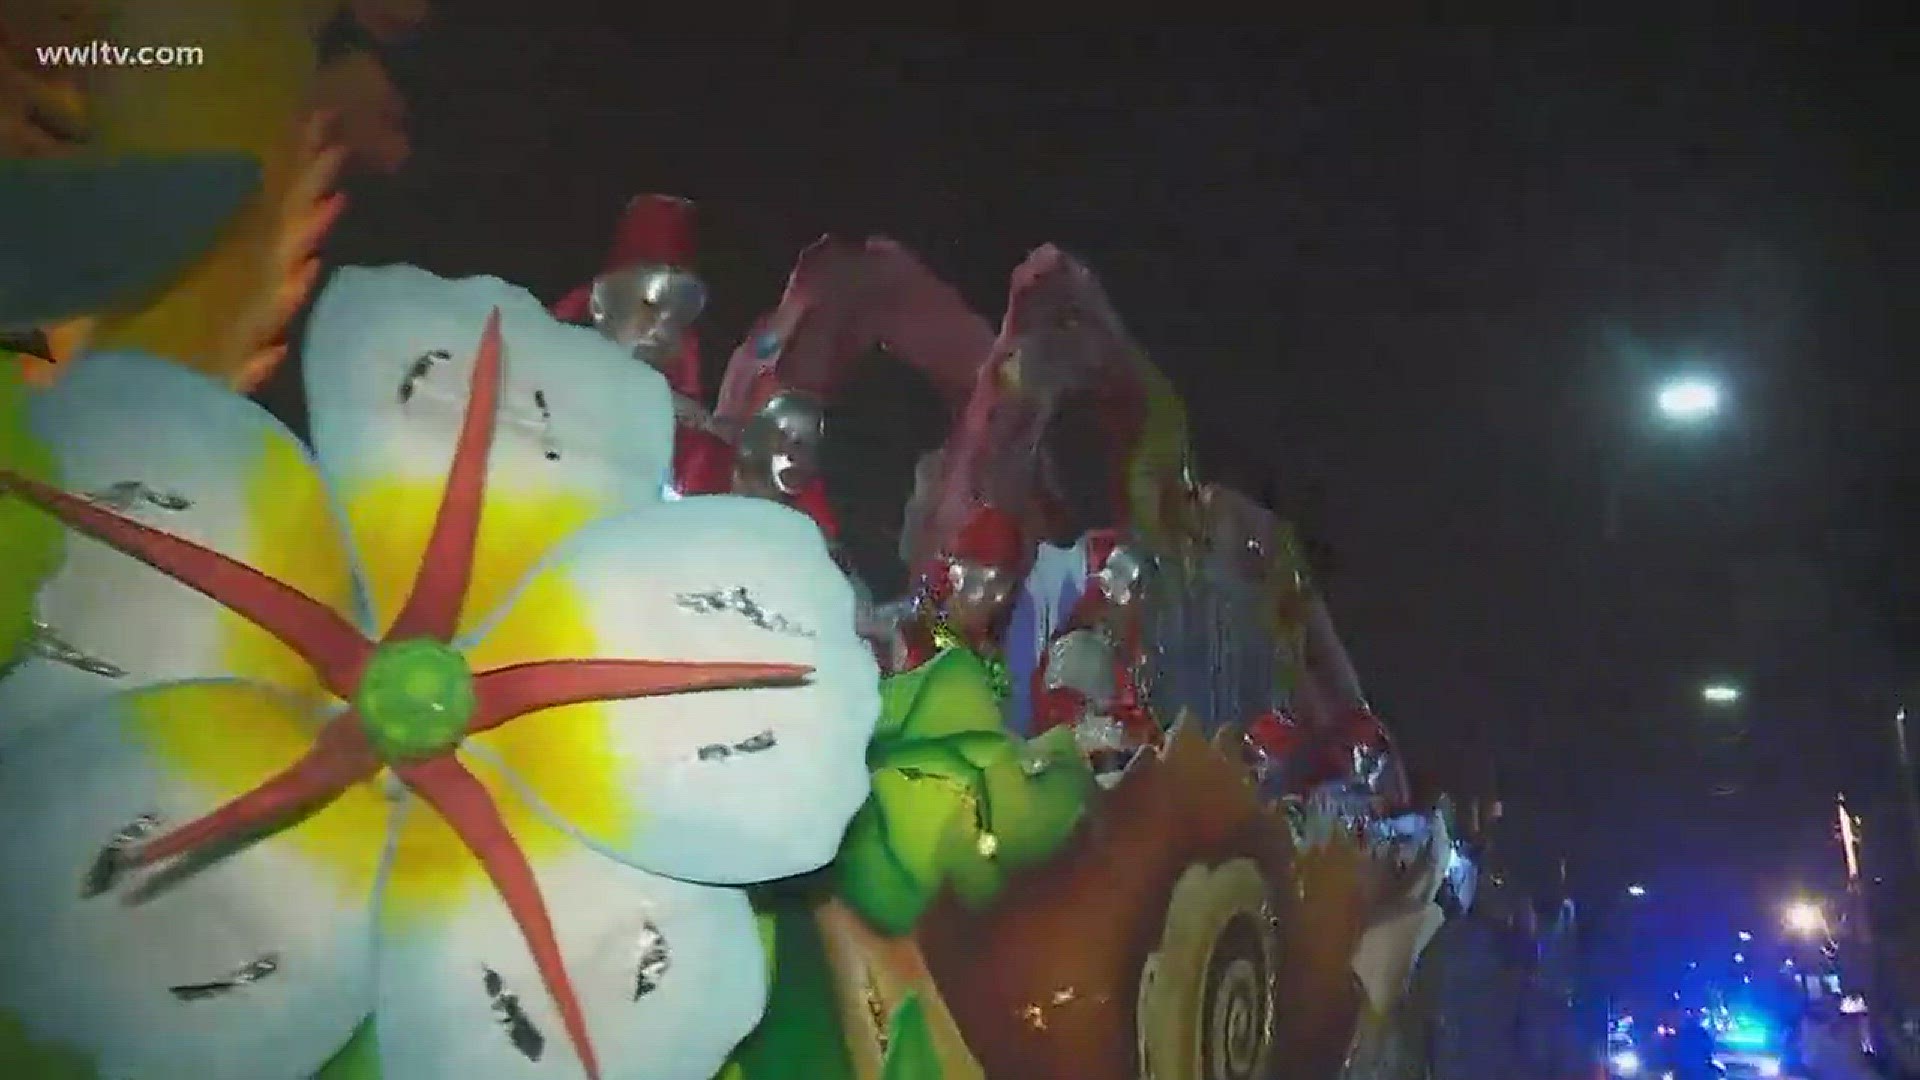 Blinking lights, biting satire and burning flambeaux were on display in New Orleans Friday.